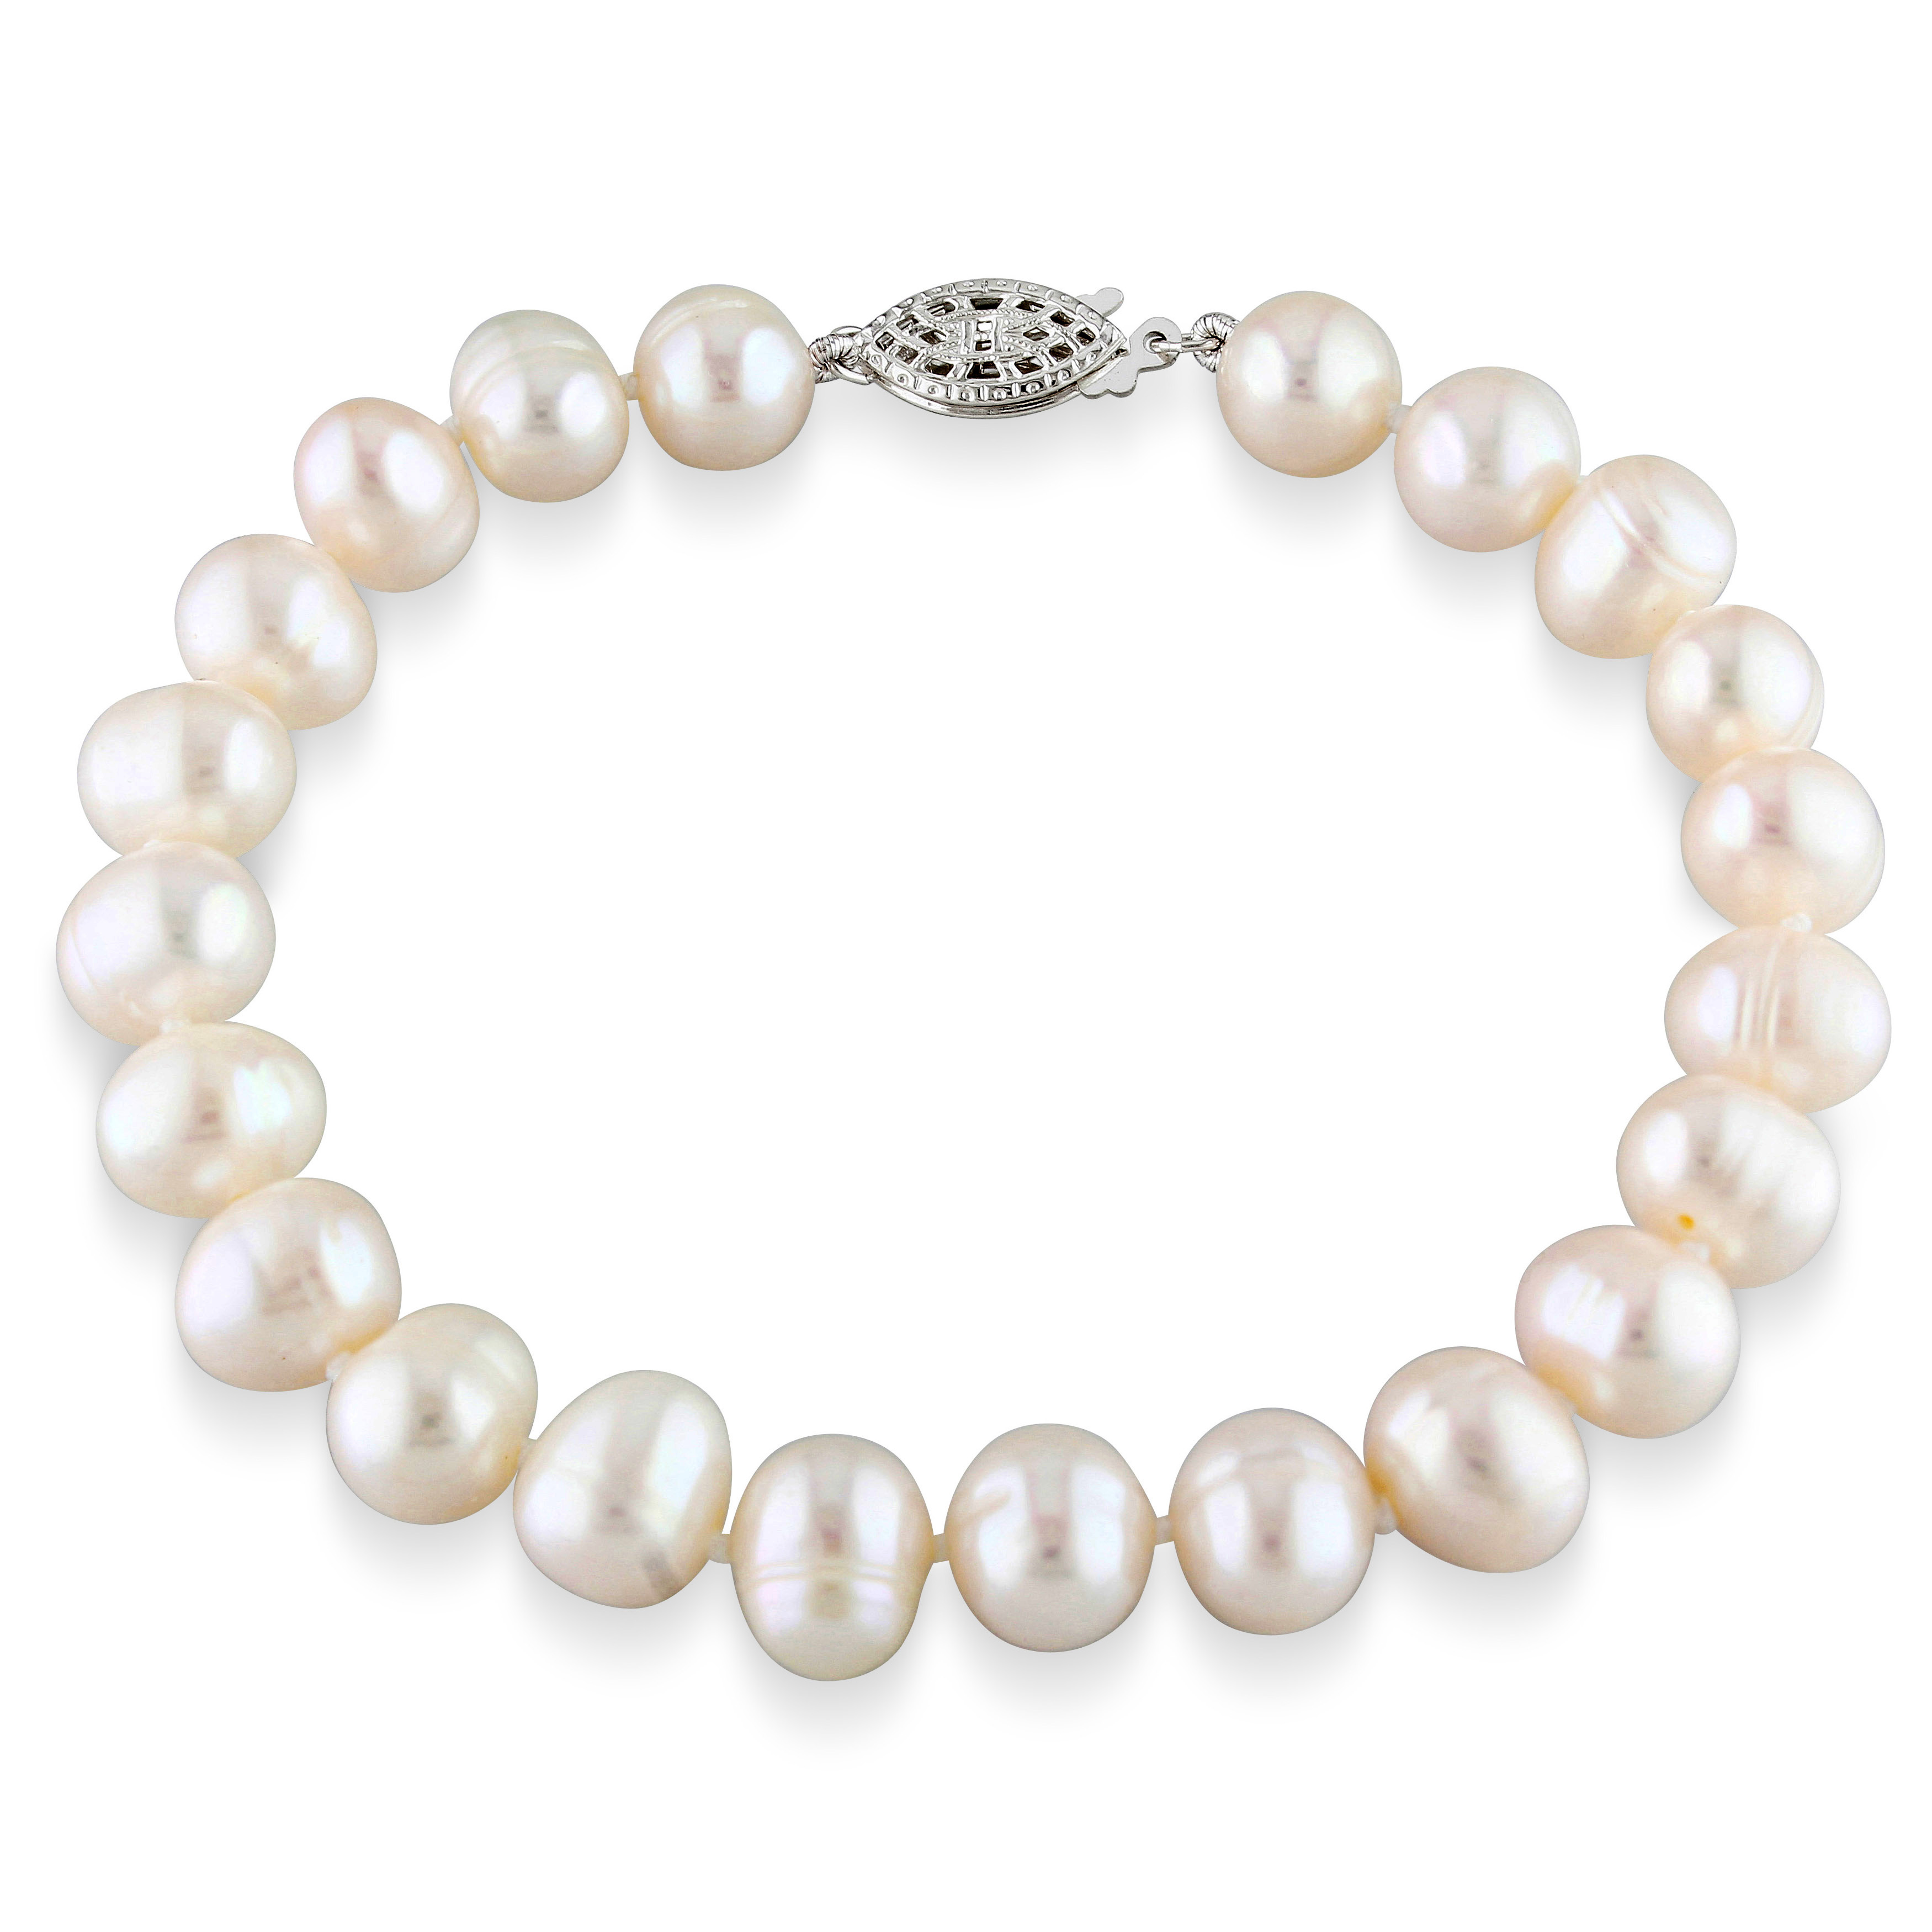 7.5 - 8mm Cultured Freshwater Pearl Bracelet with Sterling Silver Clasp